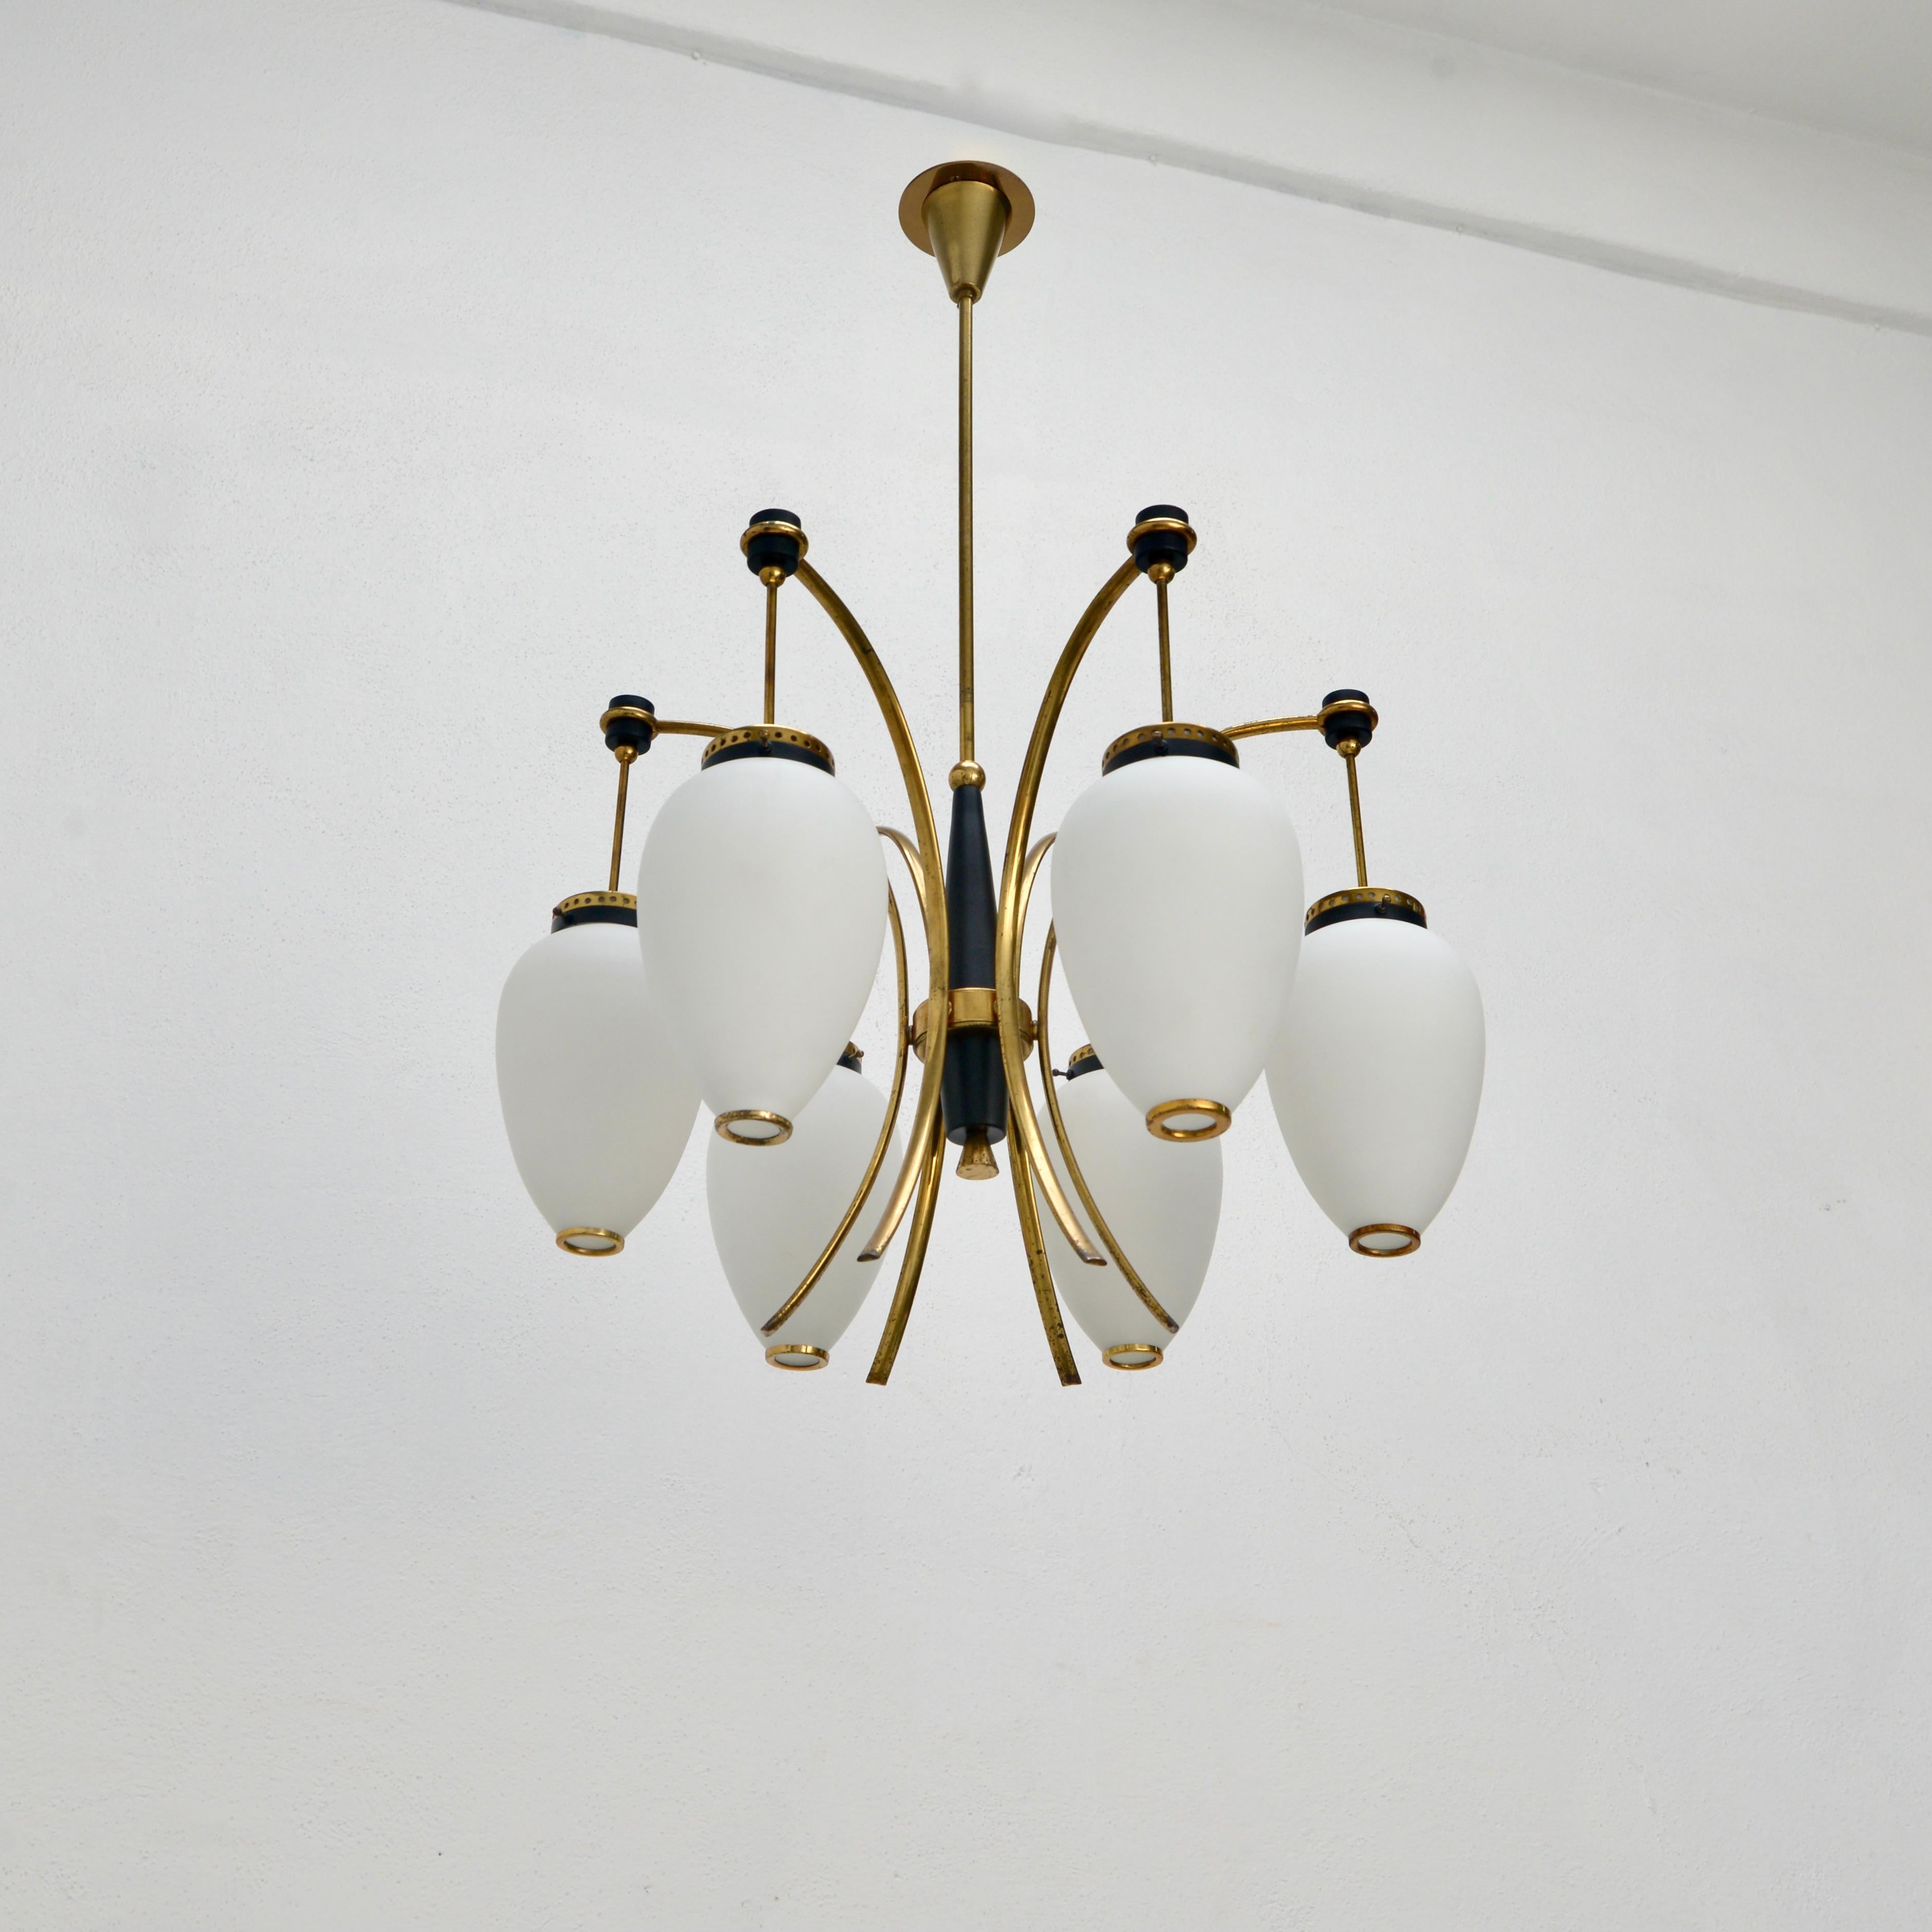 Stilnovo of the period mid century Italian 6 globe 1950s naturally aged brass chandelier with hand blown glass shades. Wired with 1-E12 candelabra based sockets (1) per globe shade (6 in total). Wired for use in the US. Light bulbs included with